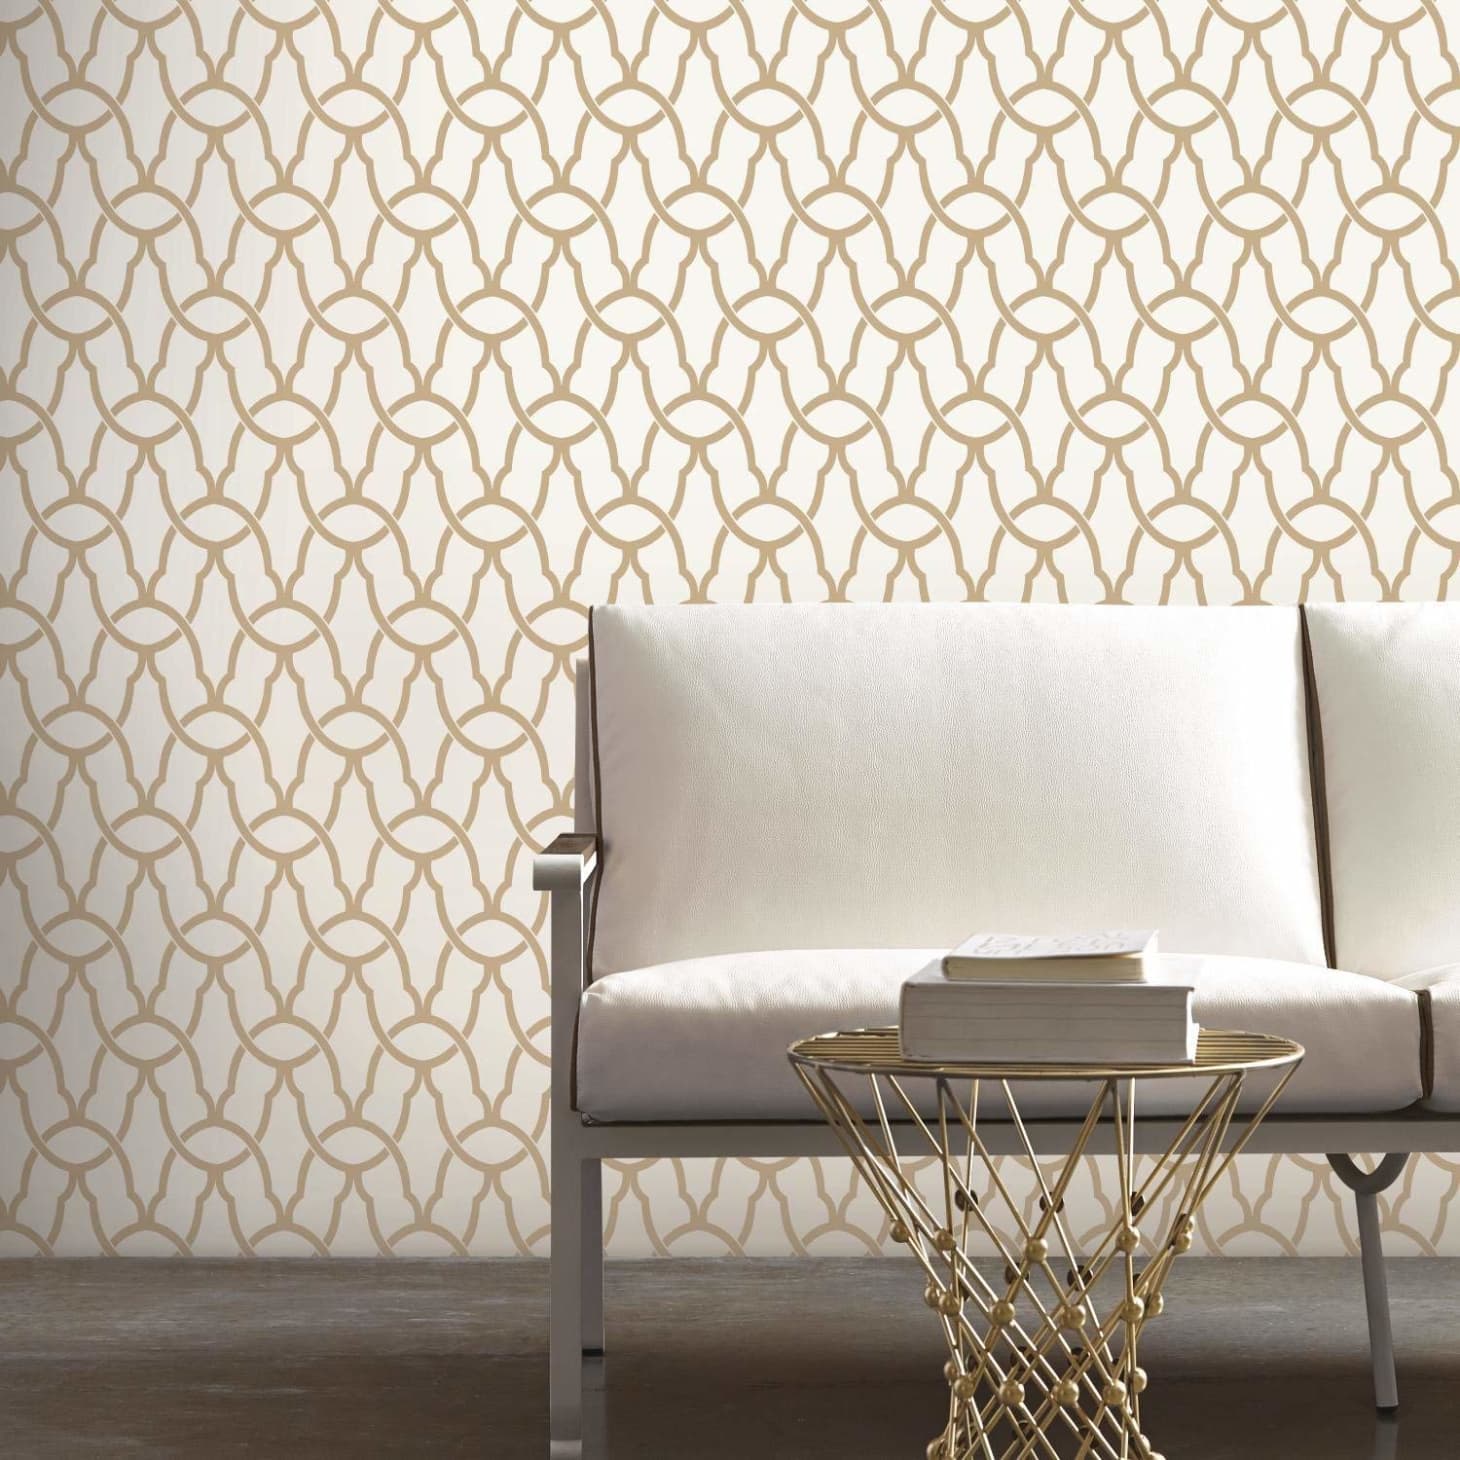 The Easiest Removable Patterned Wallpaper You Can Buy On Amazon